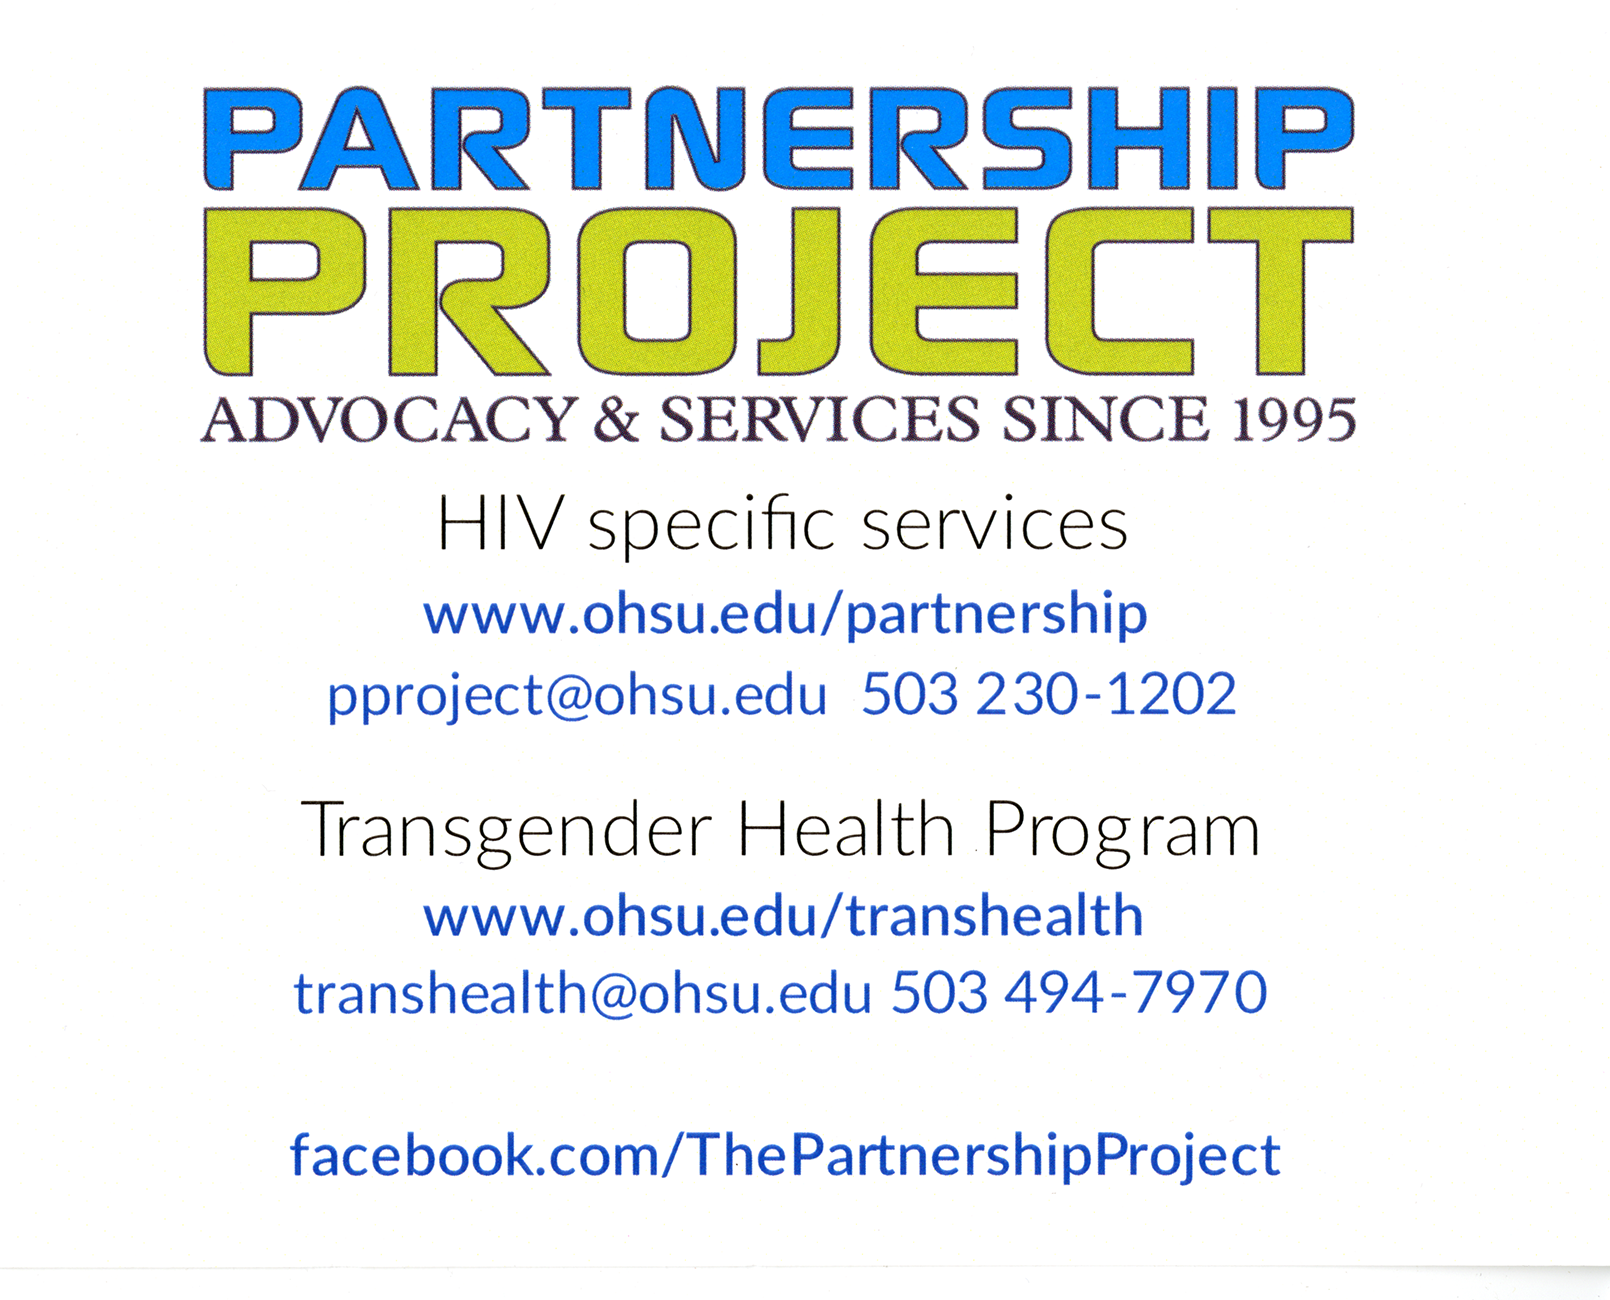 postcard text for the Partnership Project: Advocacy and Services since 1995. HIV Specific Services (contact information). Transgender Health Program (contact information).